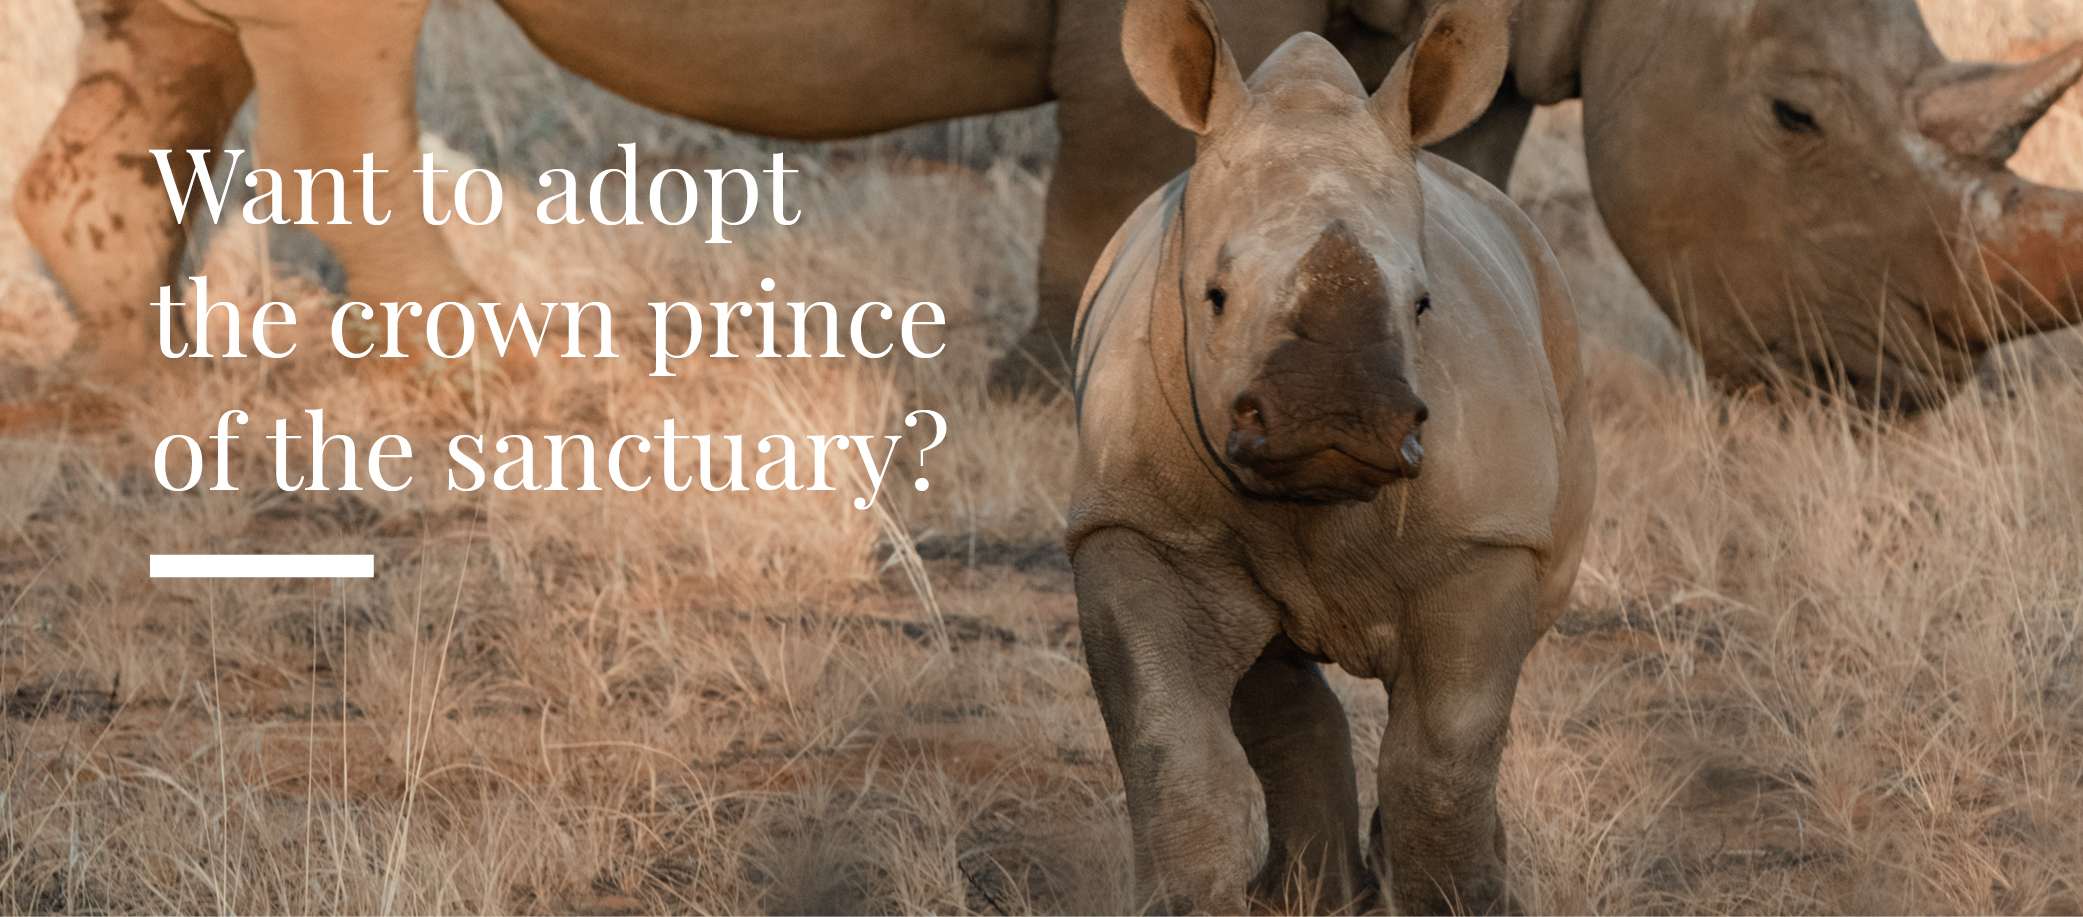 Otto, the rhino, is predicted to become the new crown prince of the reserve, offering the rare opportunity to adopt a male calf.